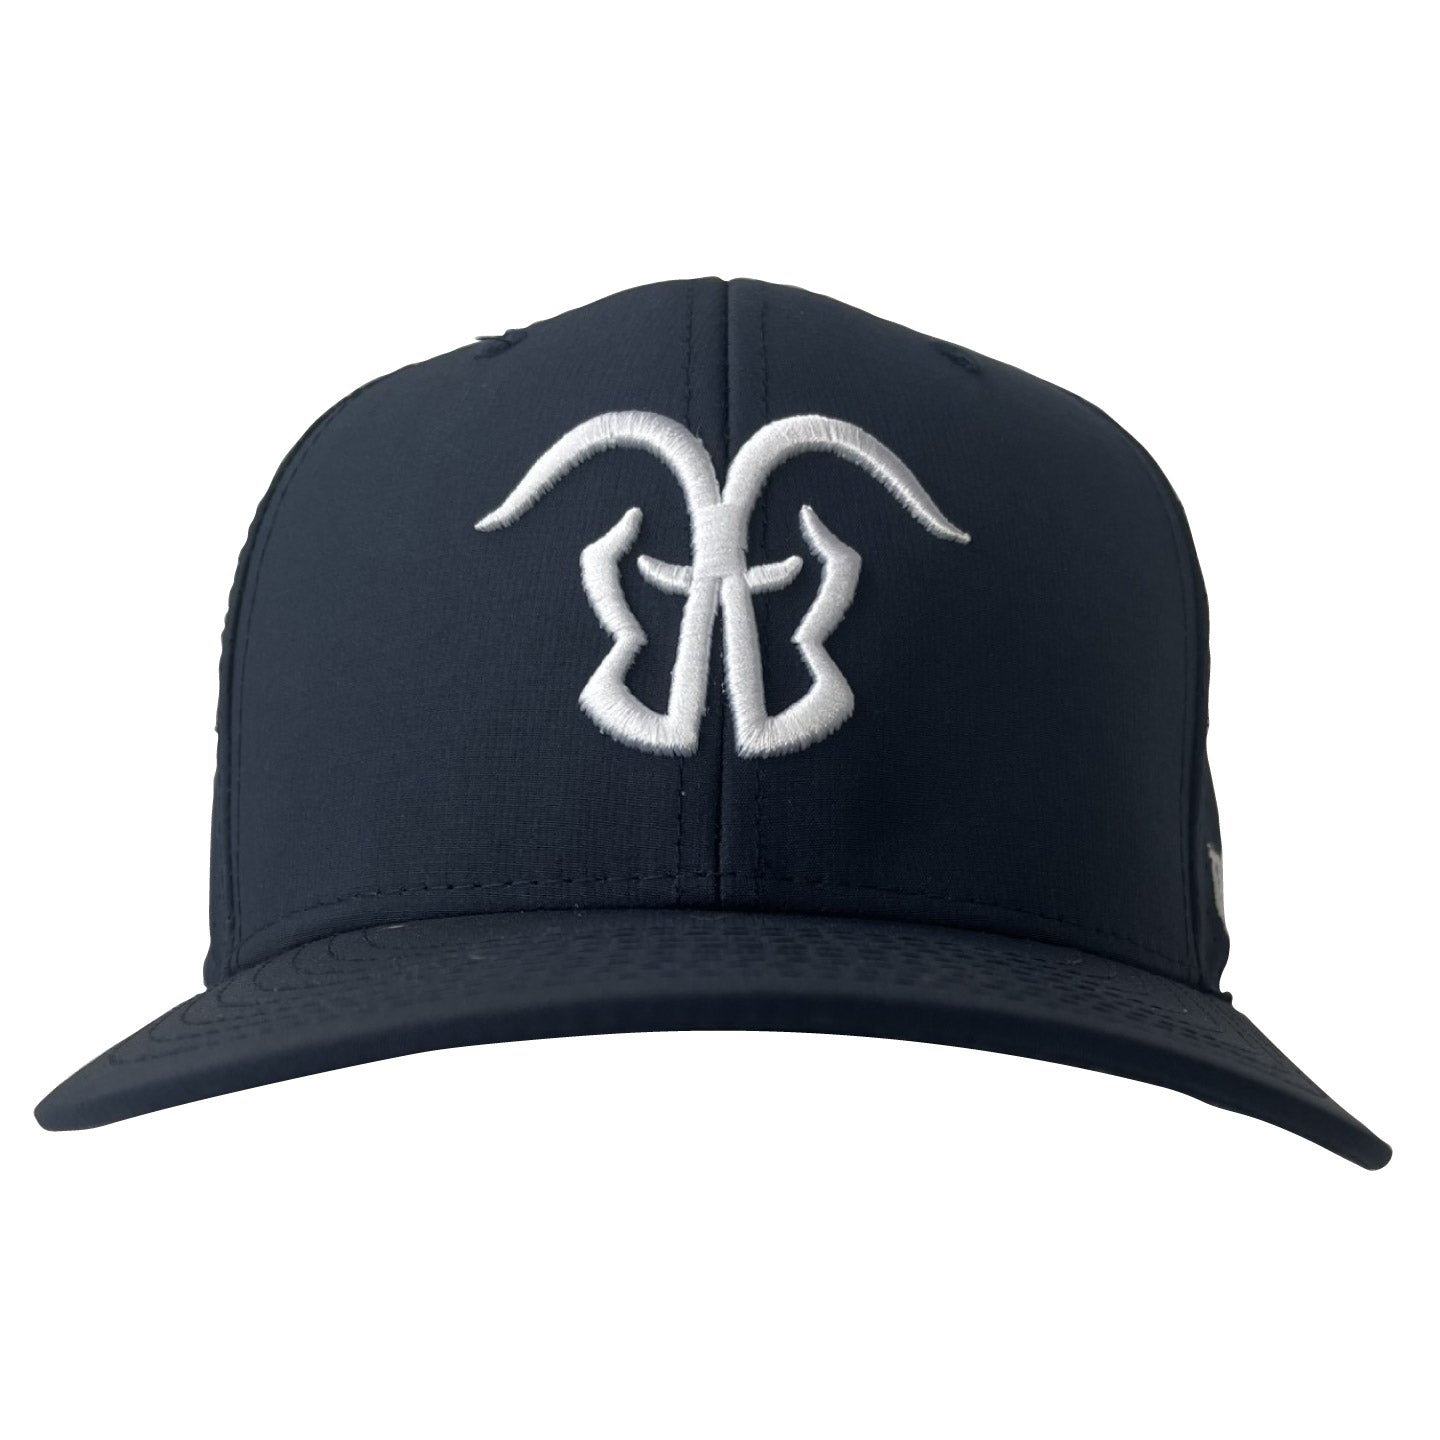 Two G.O.A.T.S. Performance Golf Hat - Navy Blue